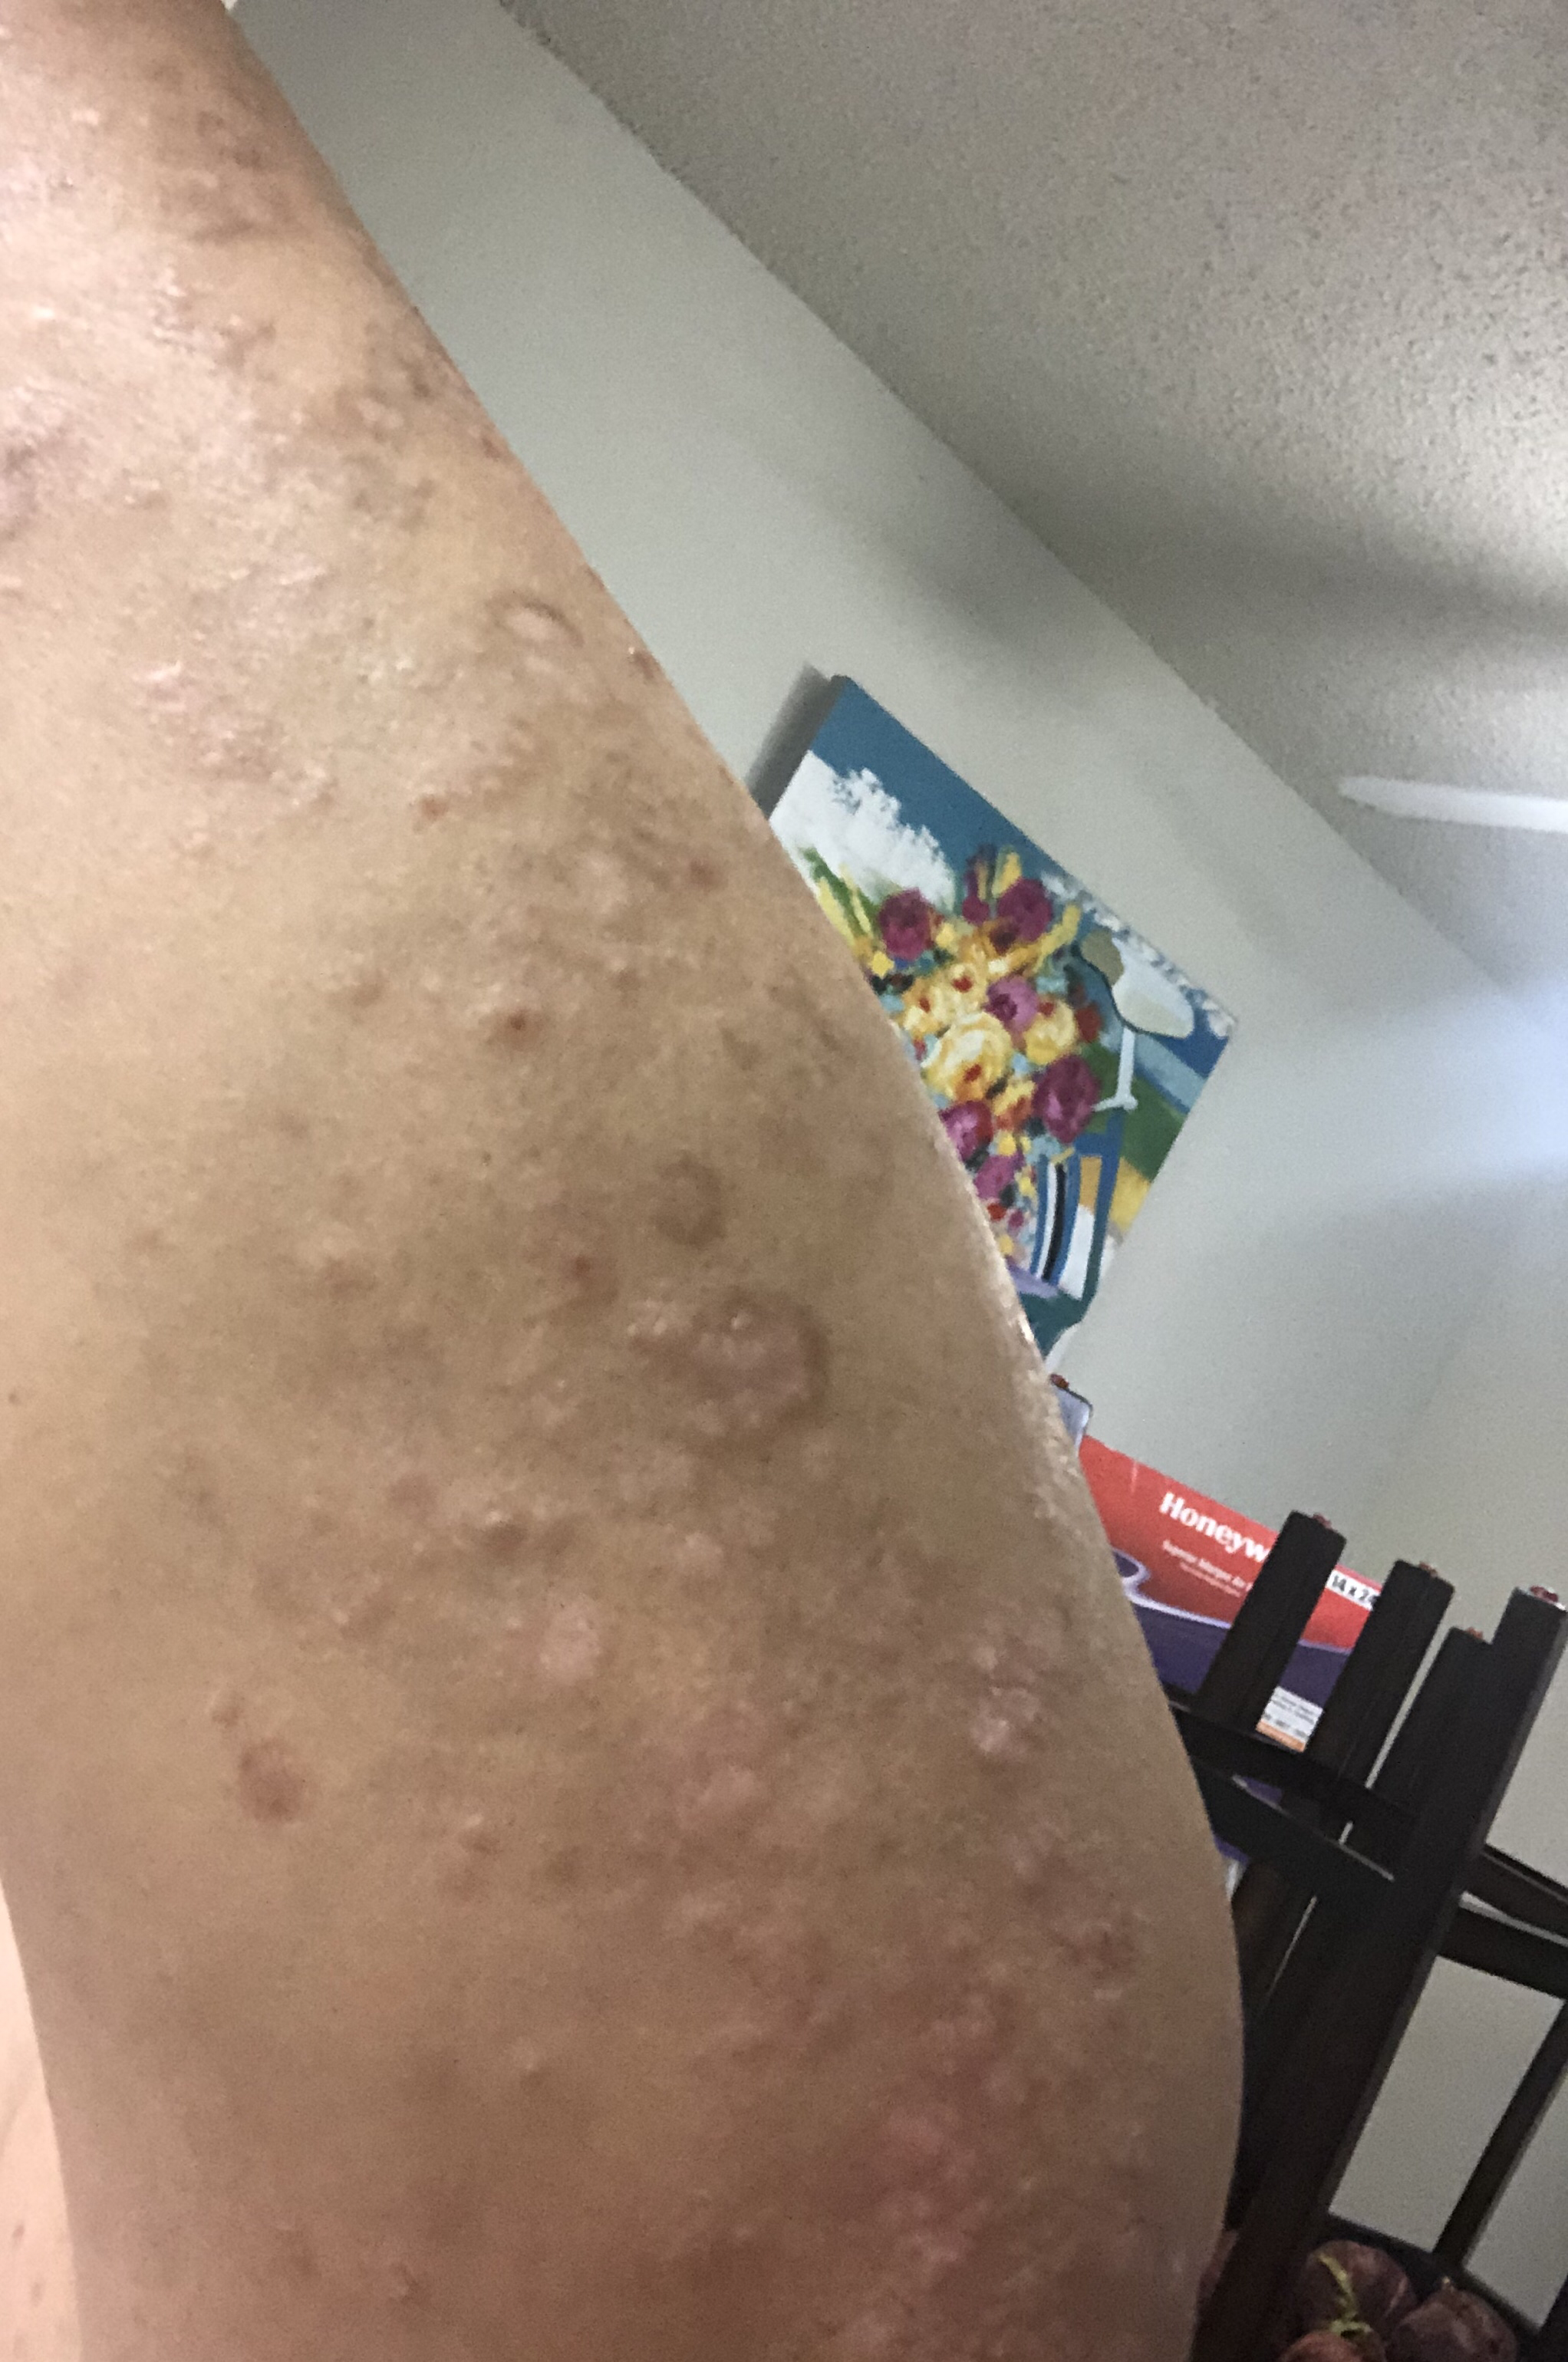 Will the scars ever disappear? : Psoriasis